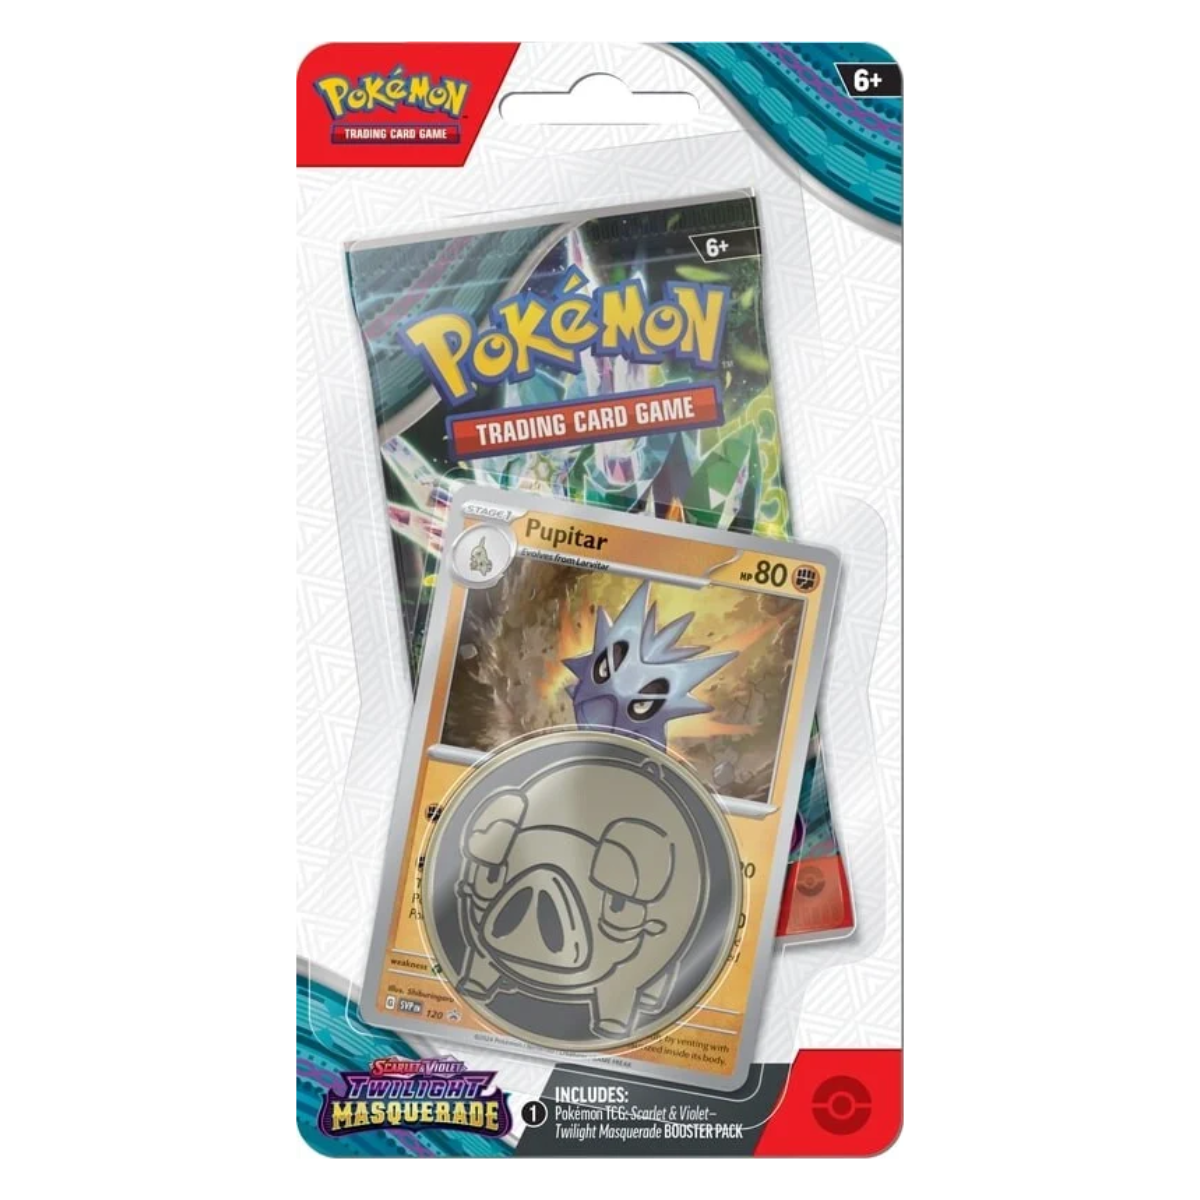 Twilight Masquerade Single Booster Blister with either Pupitar or Toxel Promo